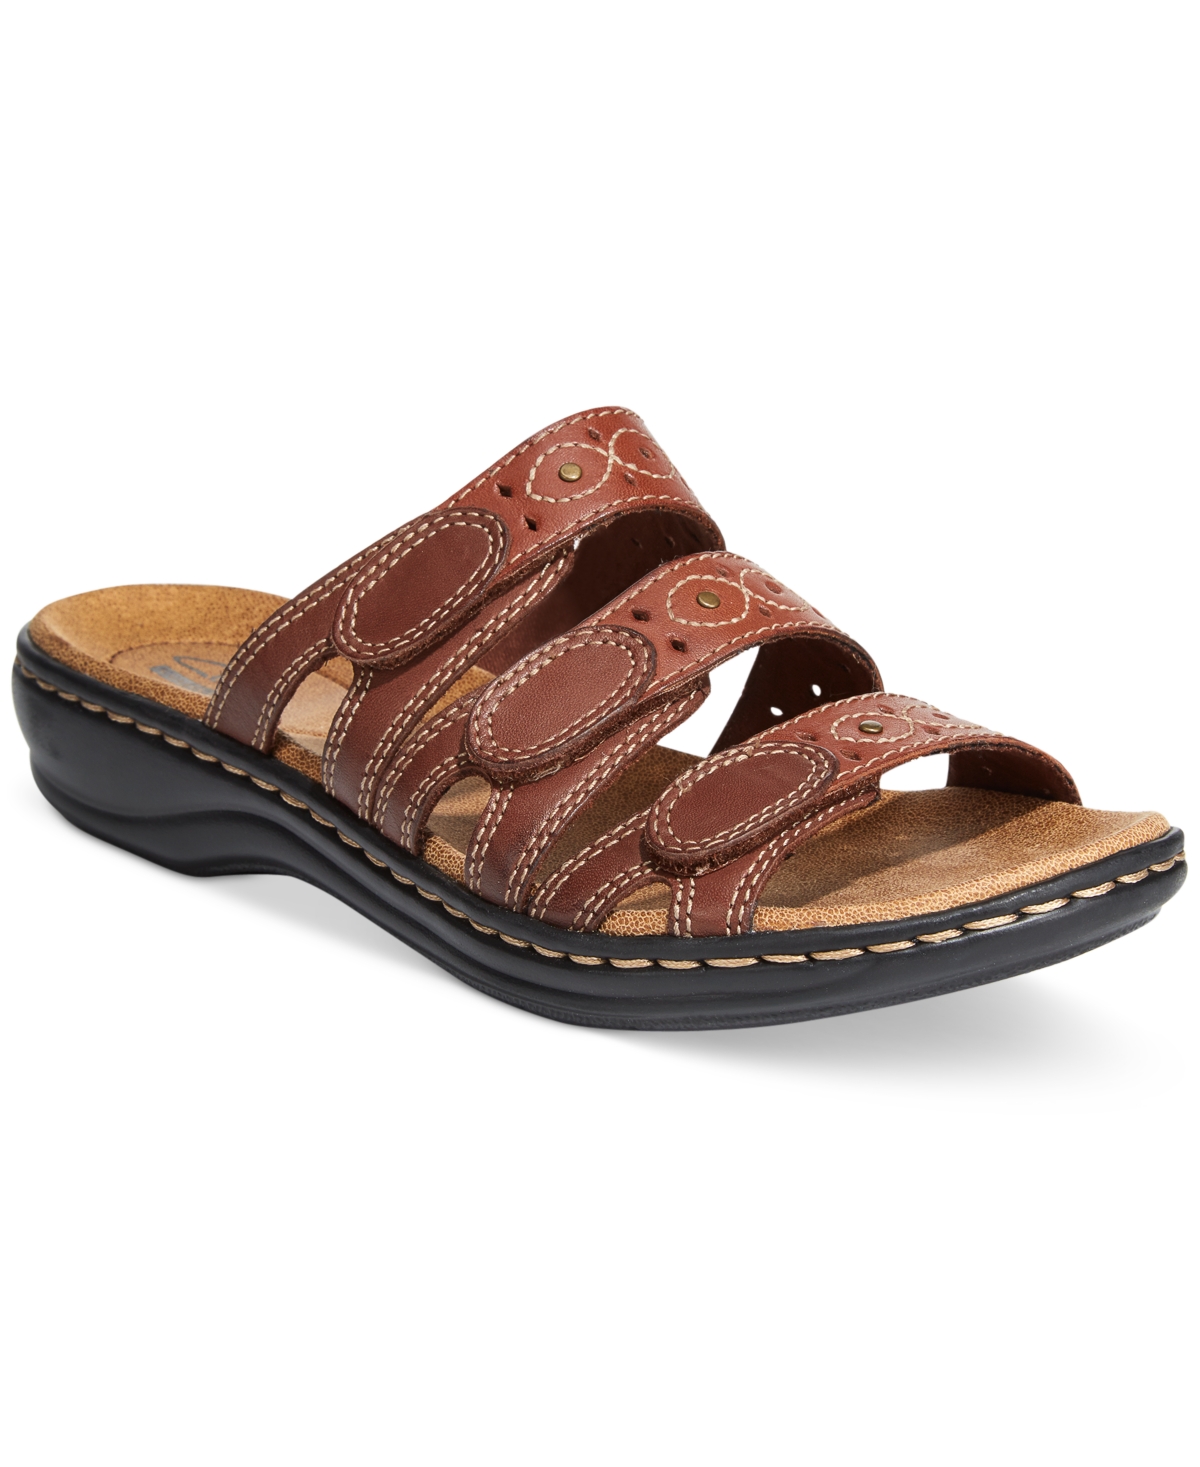 Clarks Collection Women's Leisa Cacti Q Flat Sandals In Brown Multi